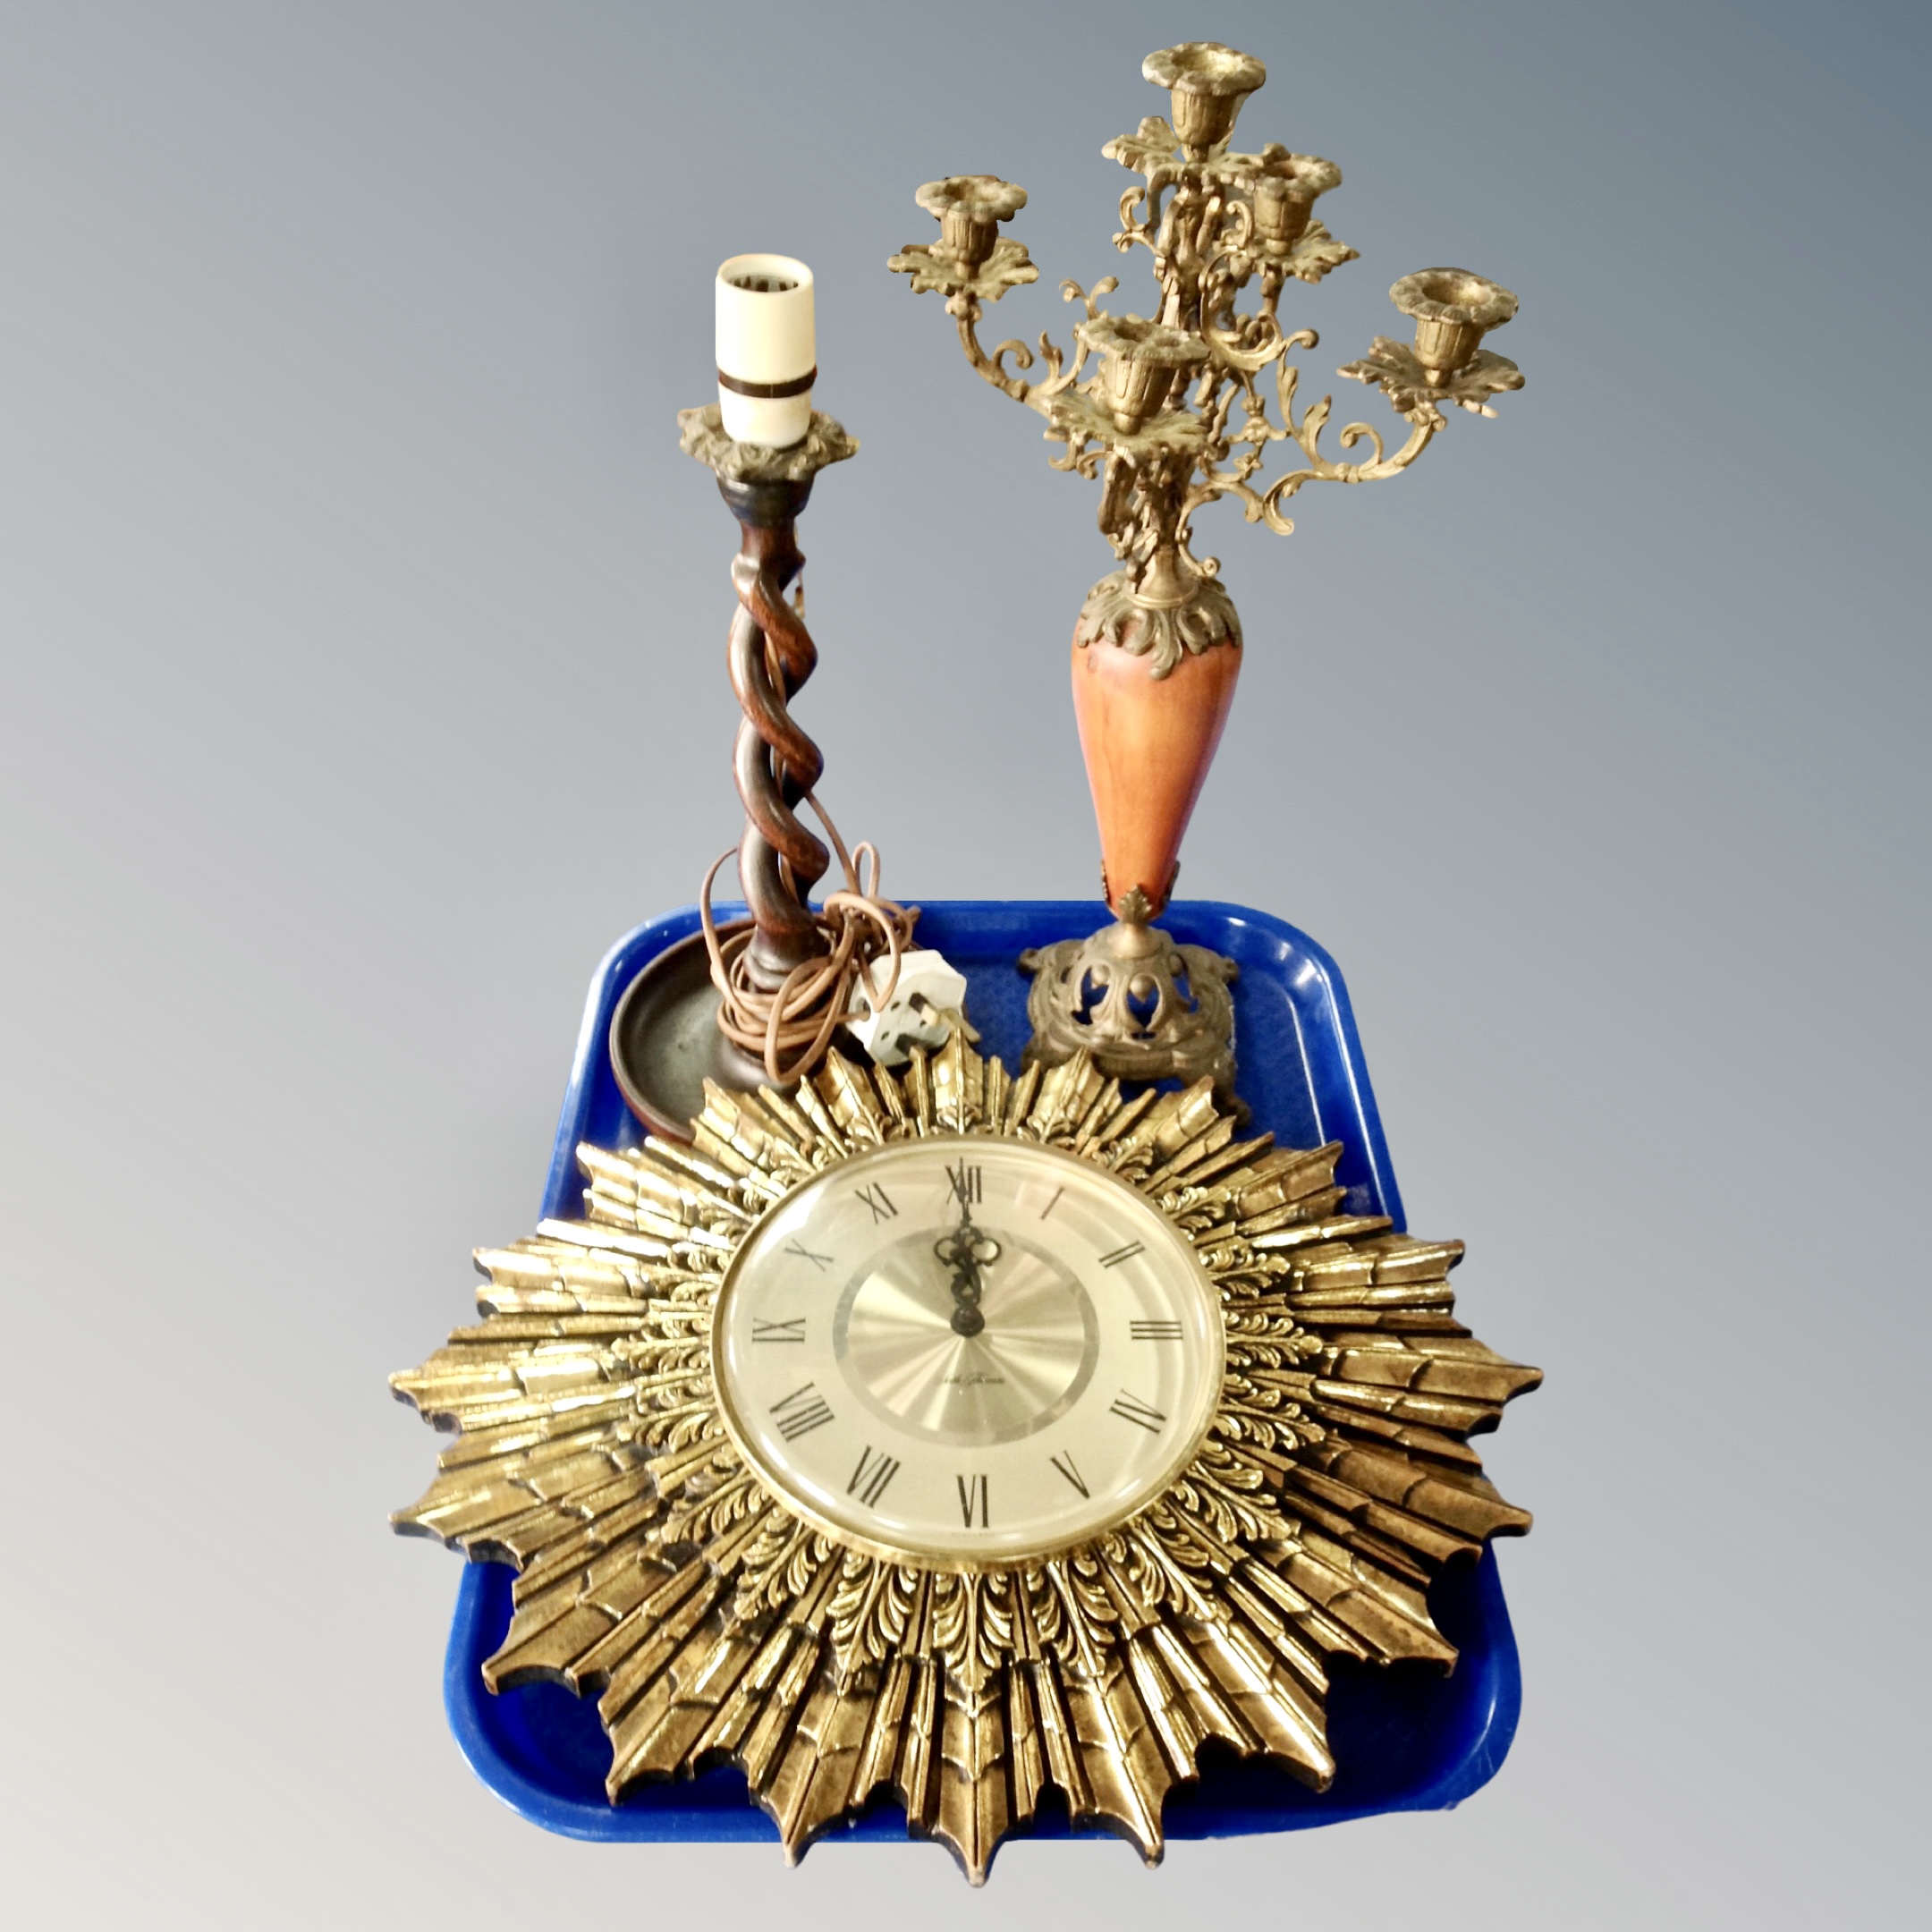 A Seth Thomas Sunburst wall clock with battery movement together with an oak candlestick converted